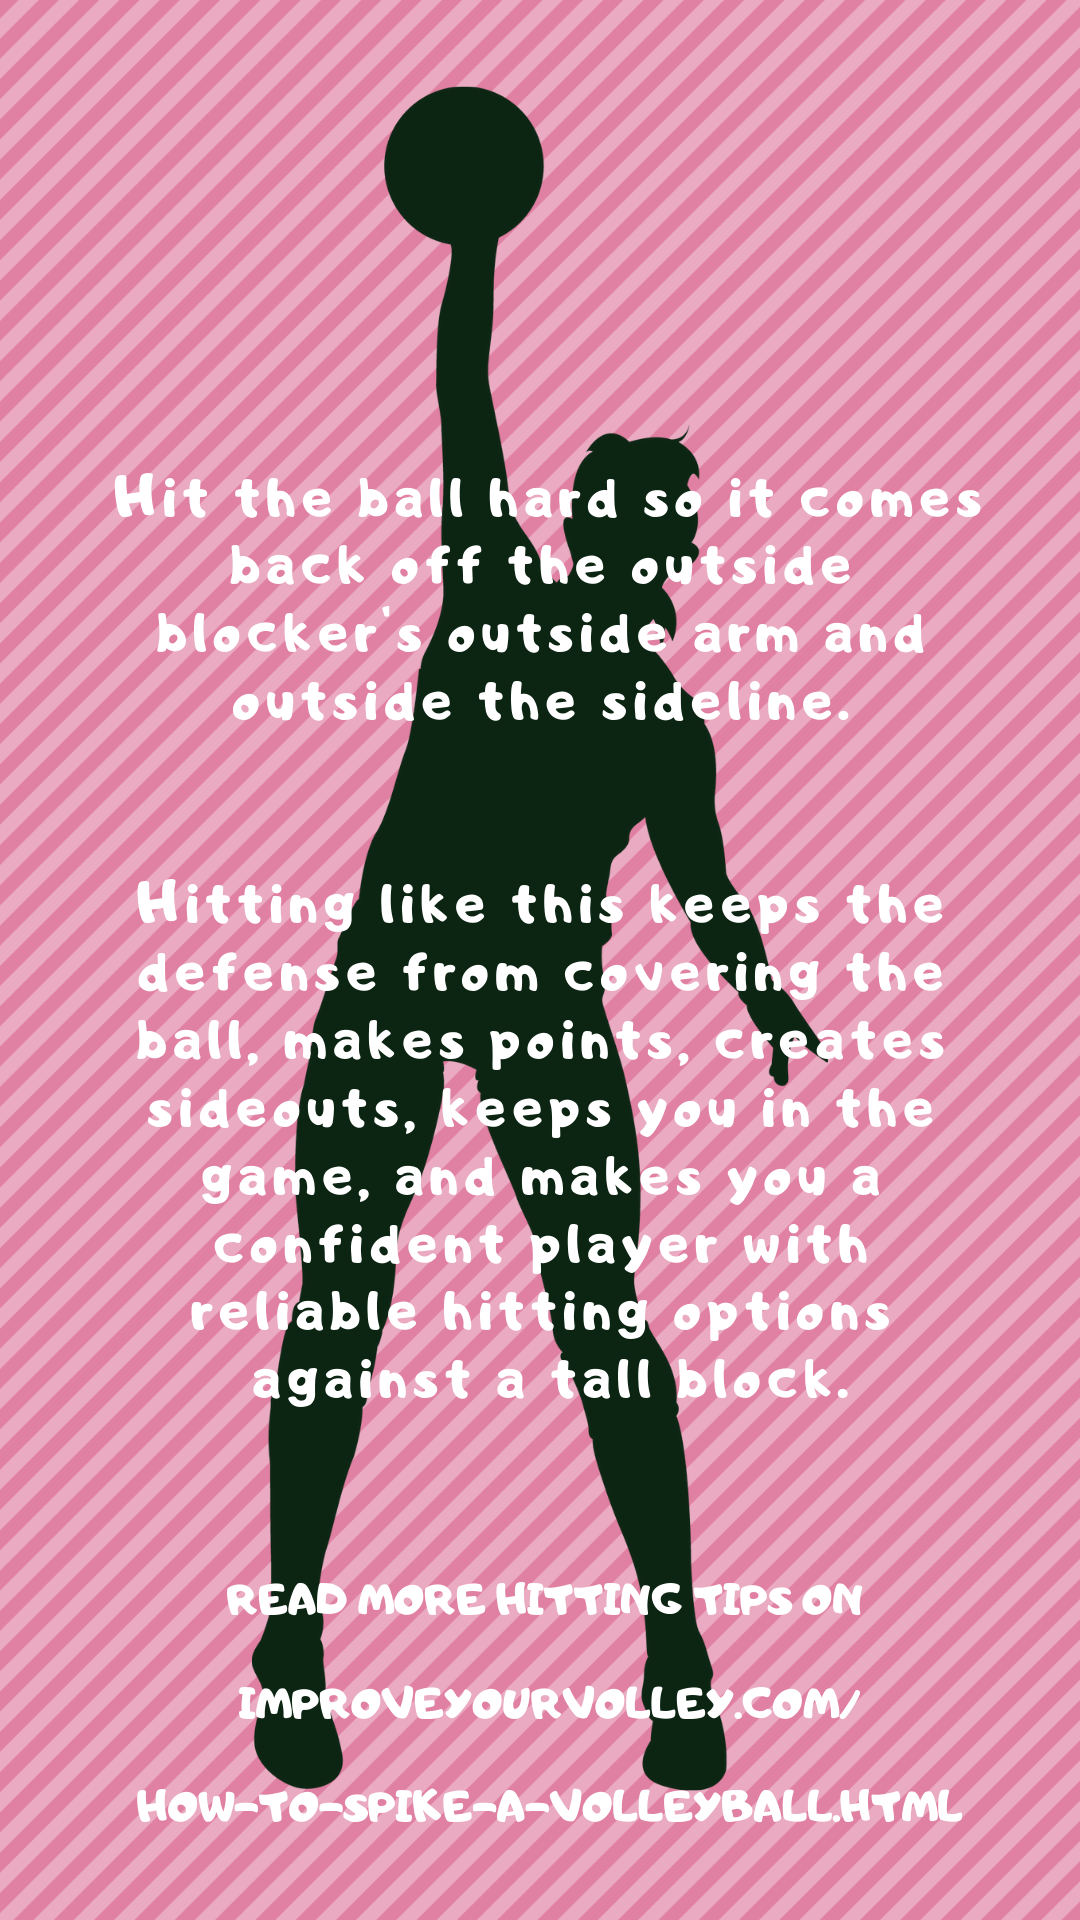 Hit the ball hard so it comes back off her arm and outside the sideline. Hitting like this keeps the defense from covering the ball, makes points, creates sideouts, keeps you in the game...